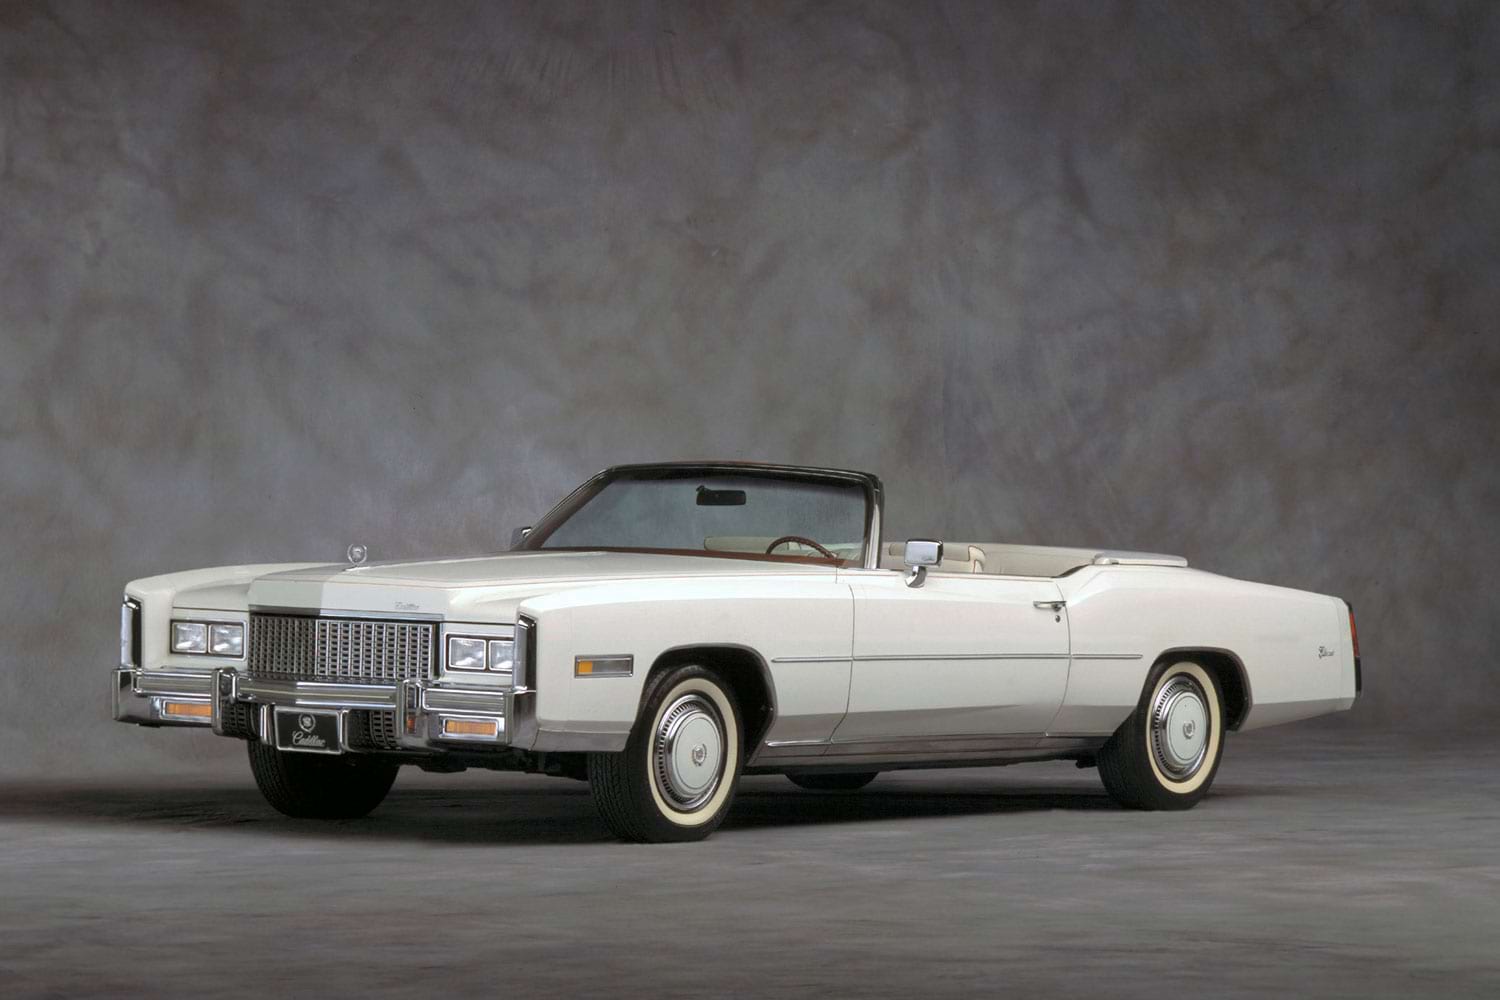 A Brief History Of Cadillac 1960-1980: Innovation And Excess